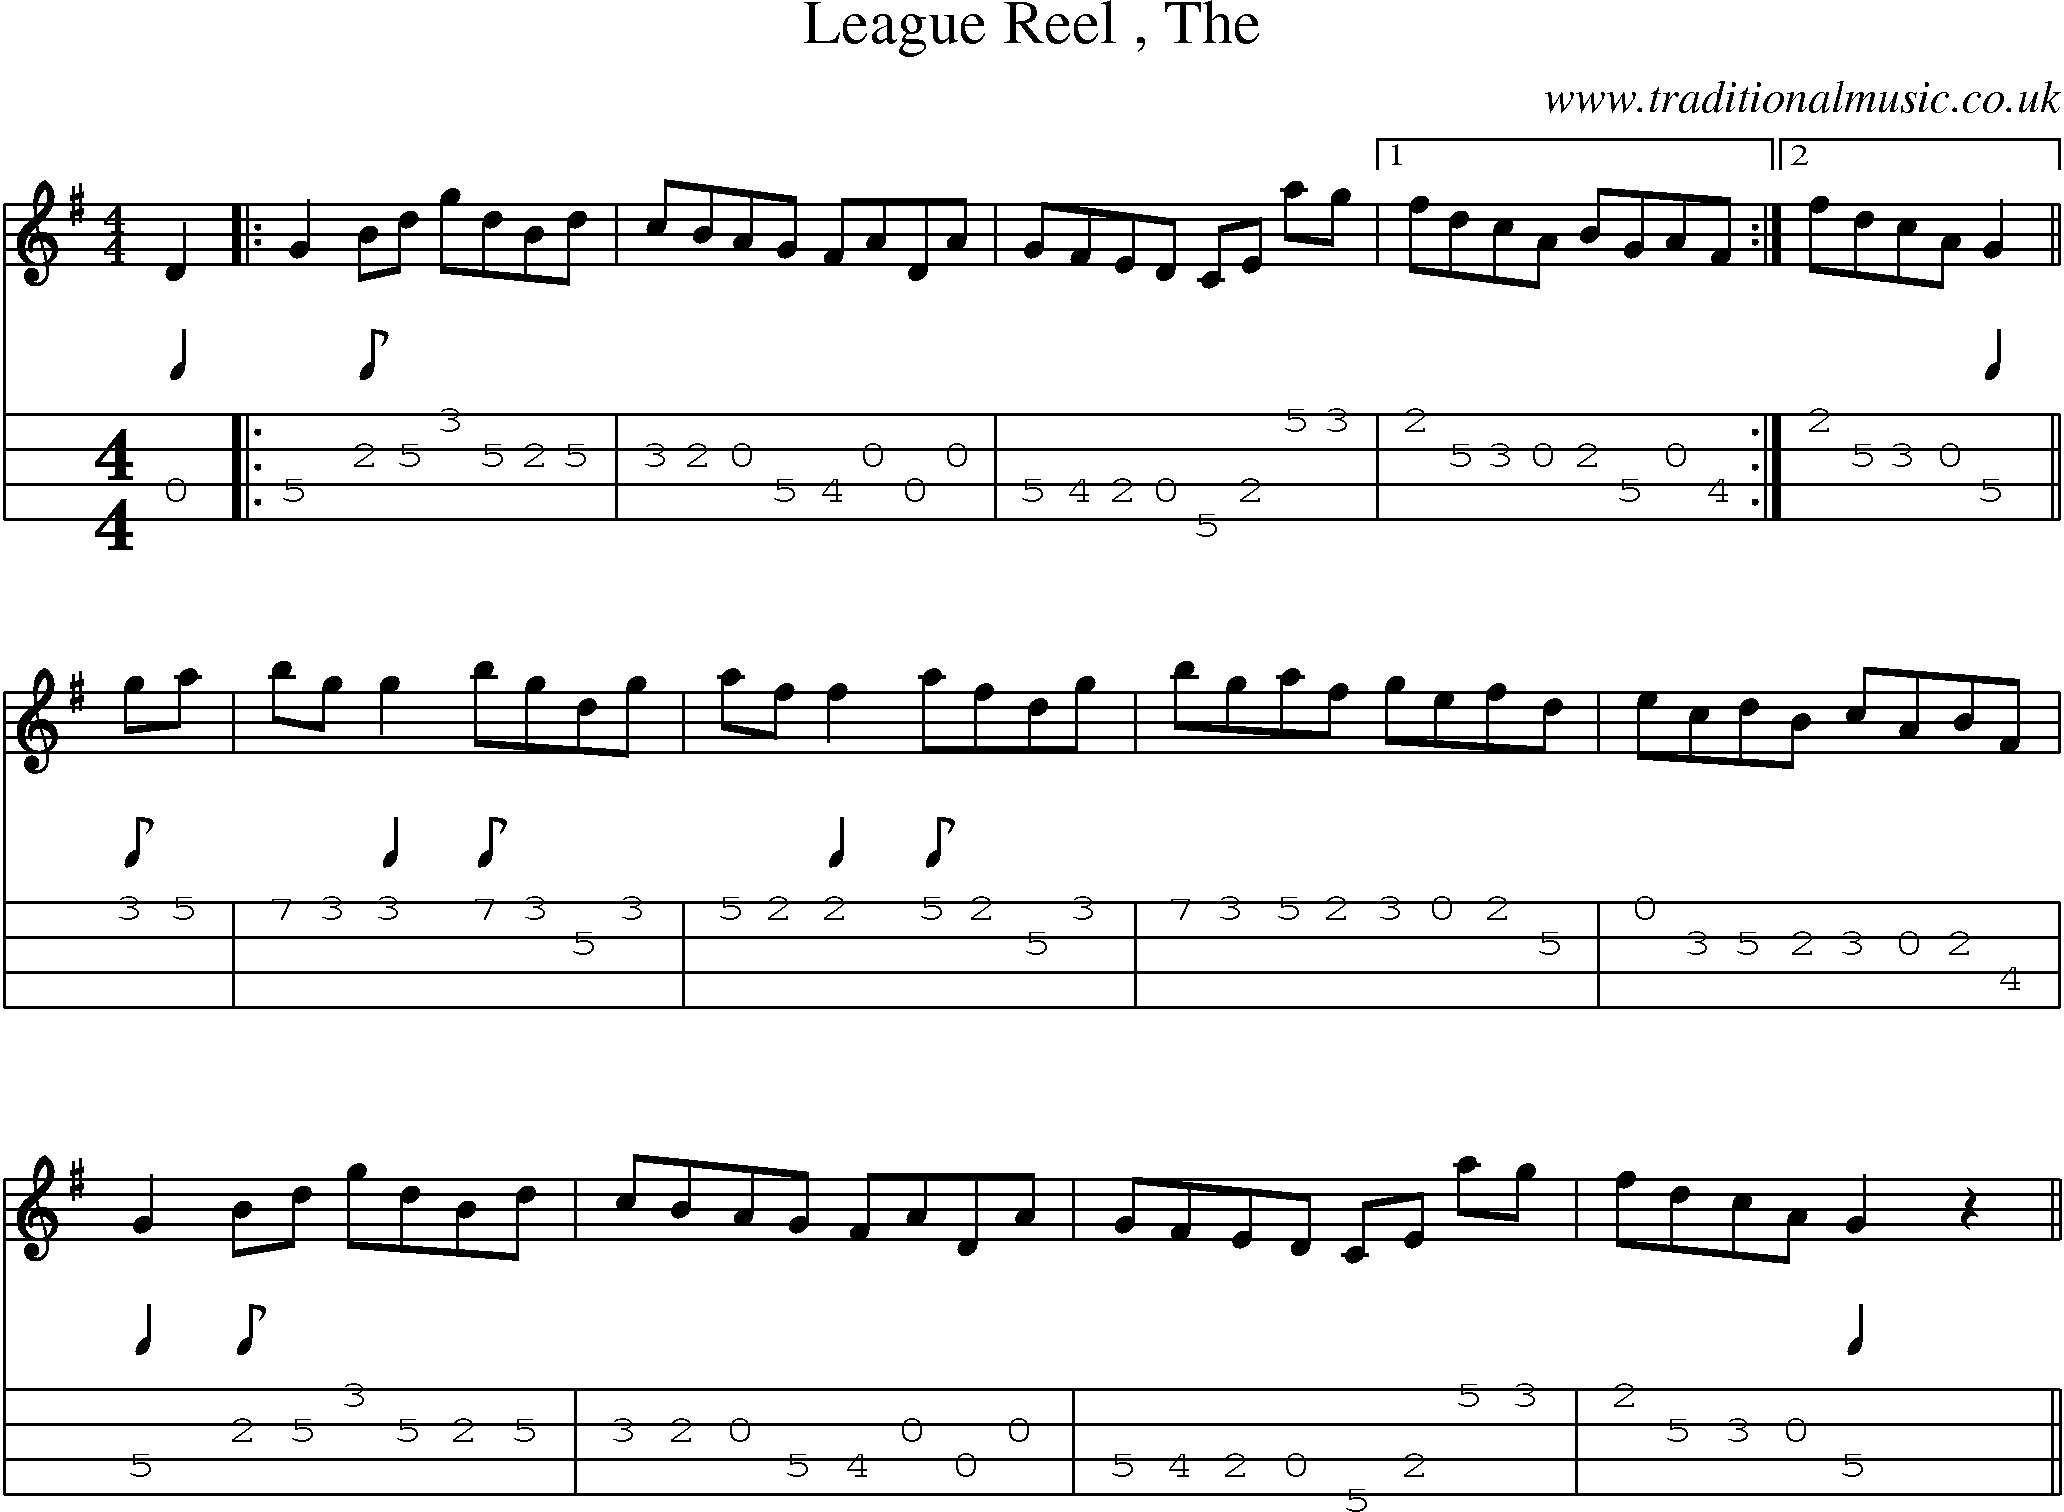 Music Score and Mandolin Tabs for League Reel